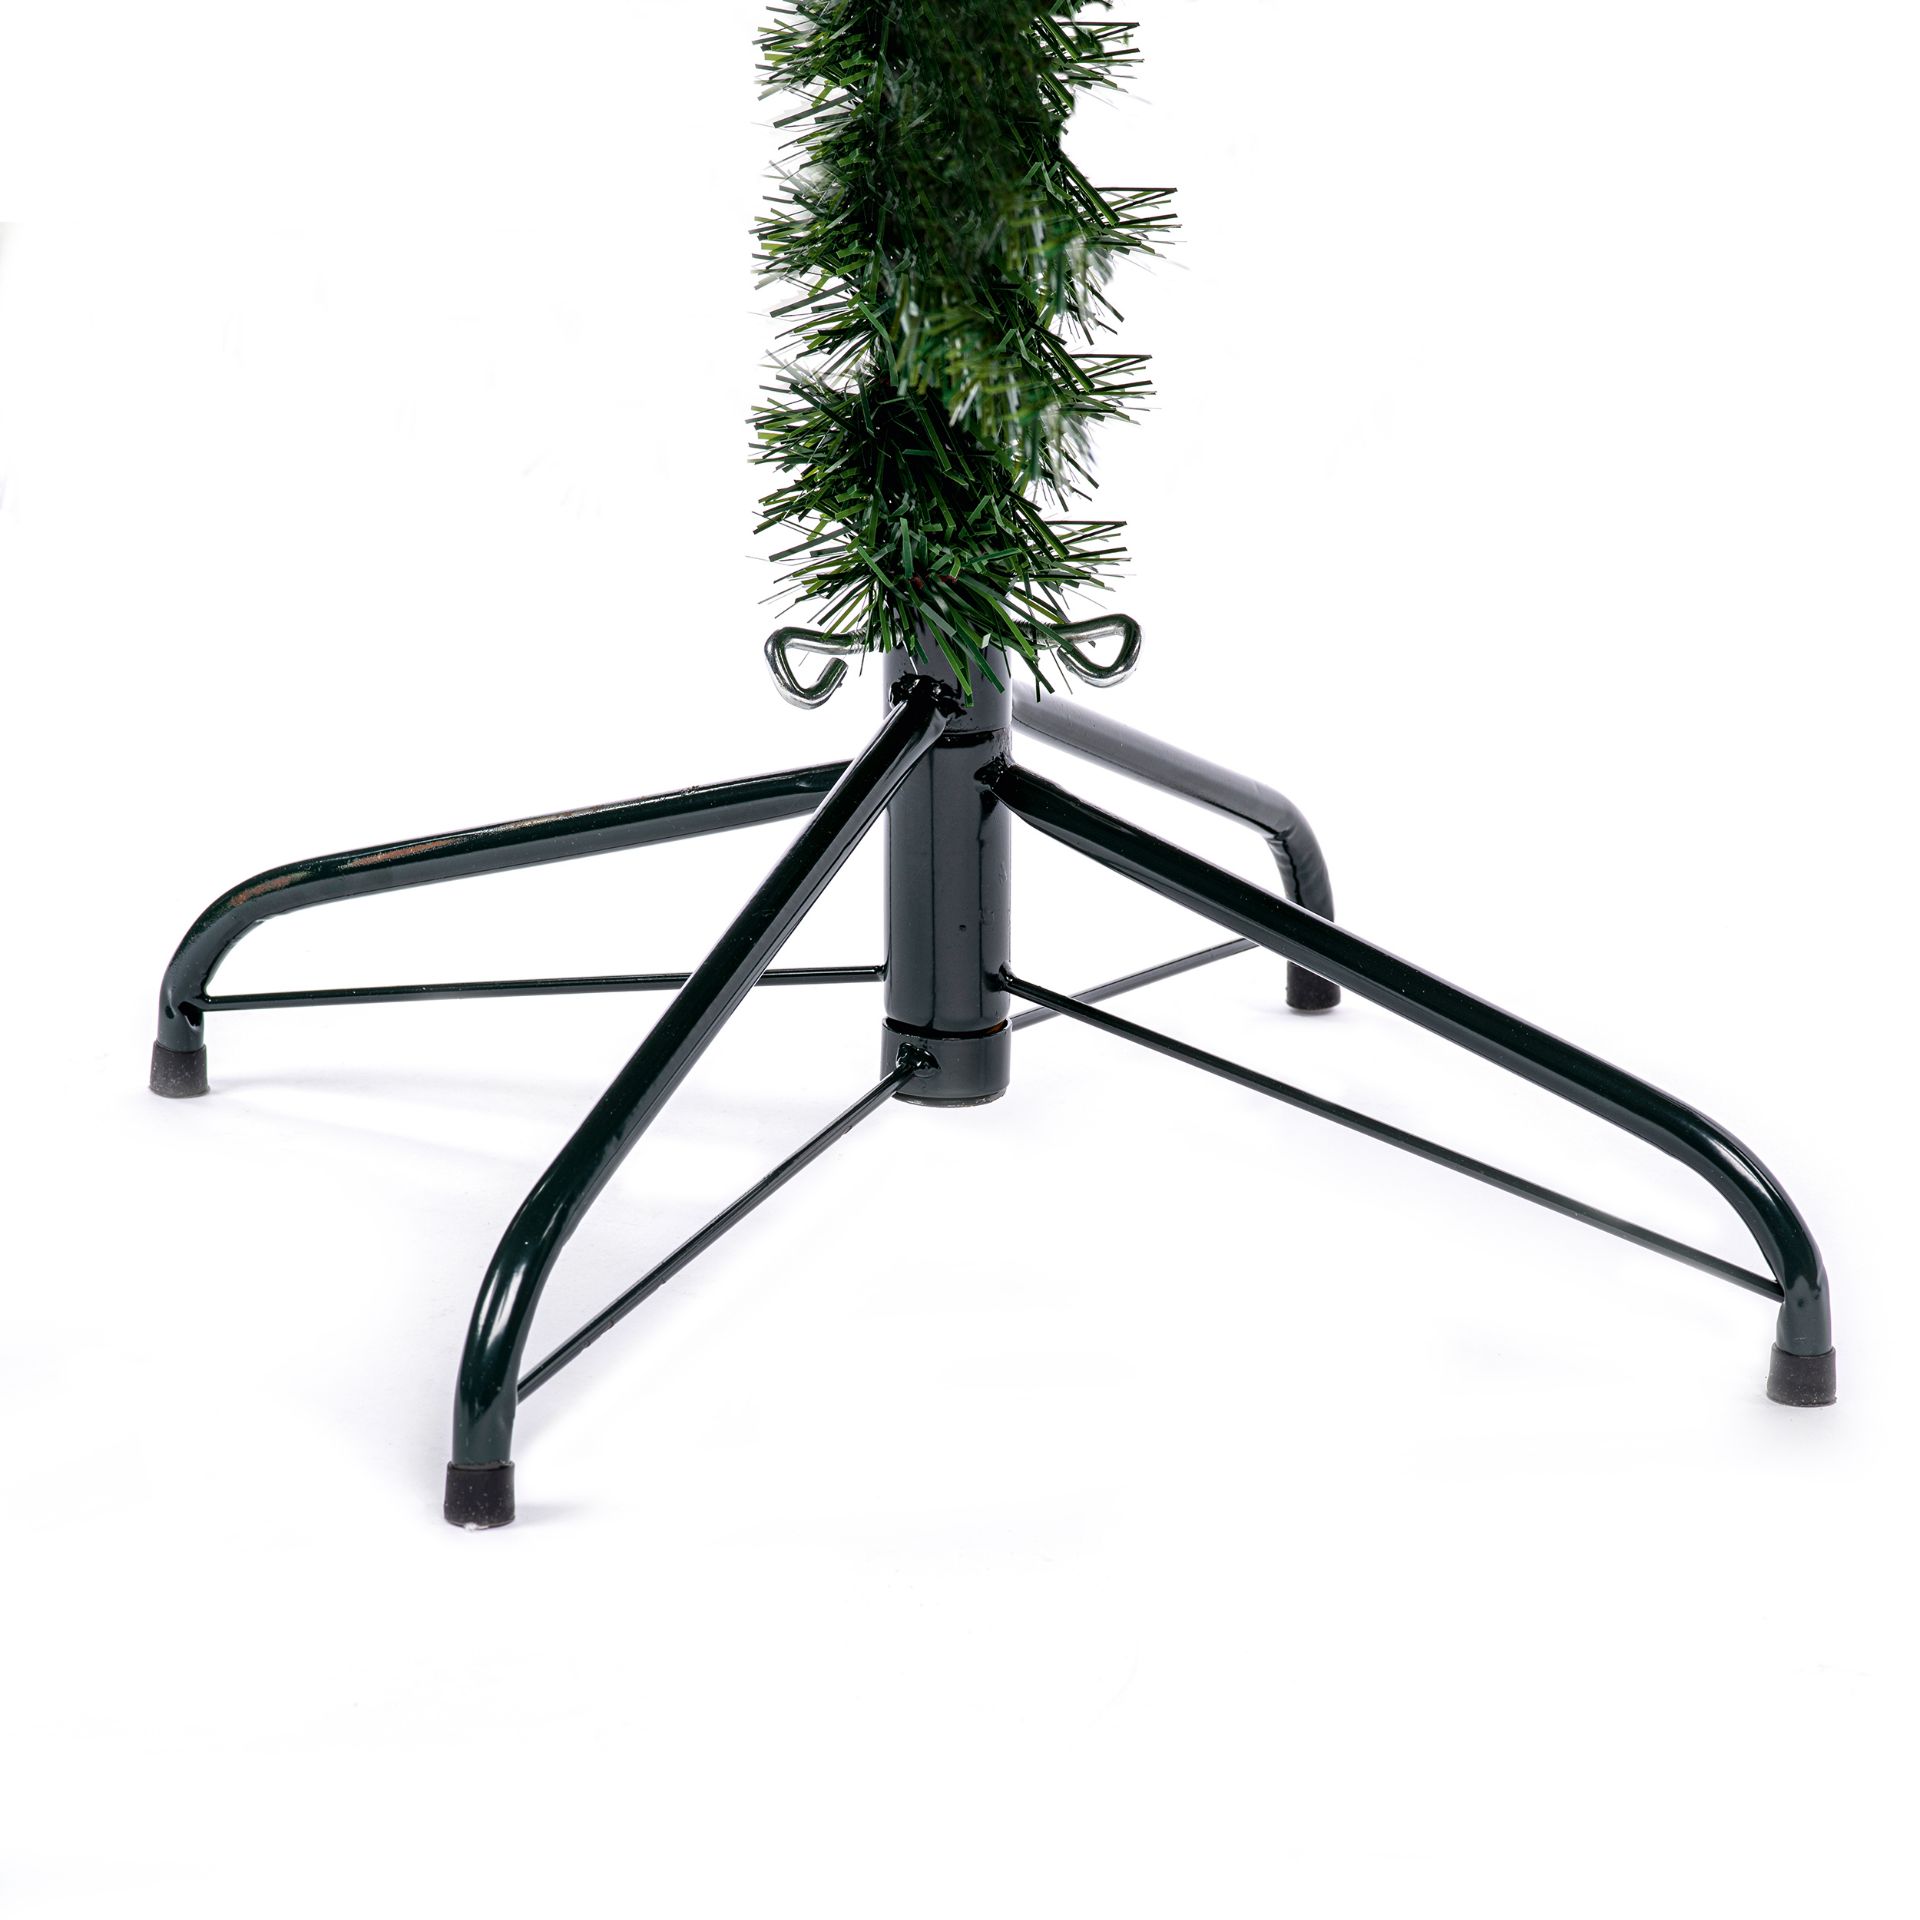 New Premier 1.8m Slim New Jersey Spruce Christmas Tree - PE/PVC w Cones and Berries - Image 4 of 6